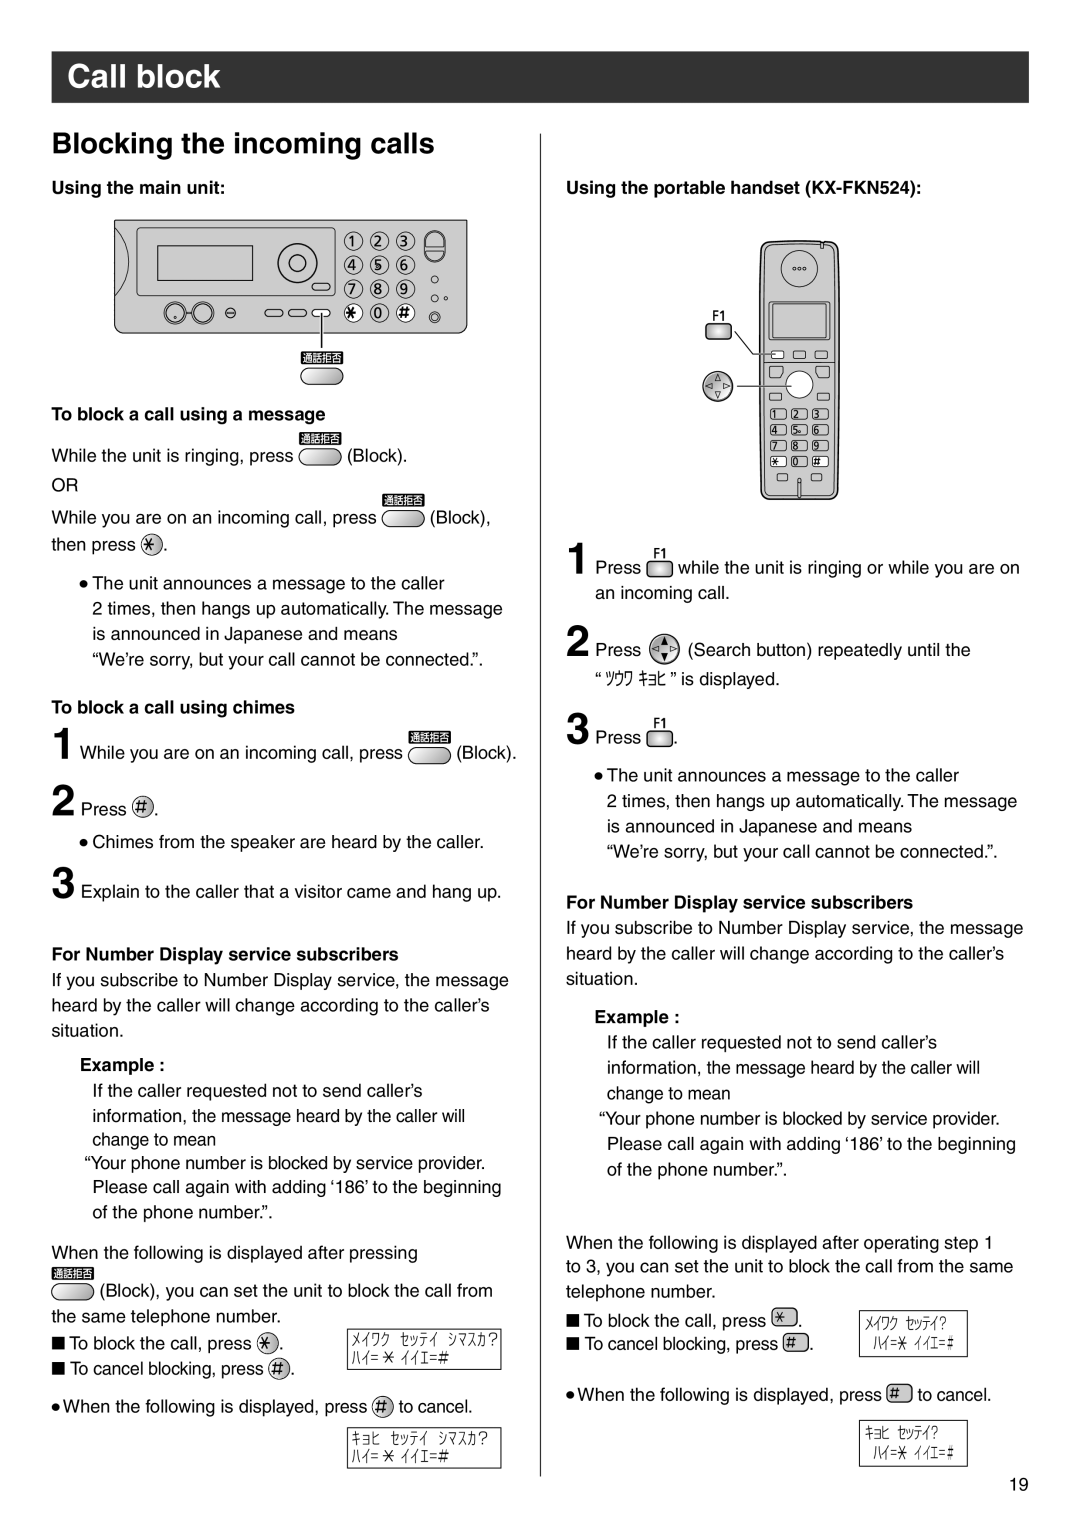 Panasonic KX-PW506DW Call block, Blocking the incoming calls, Using the main unit To block a call using a message, Example 